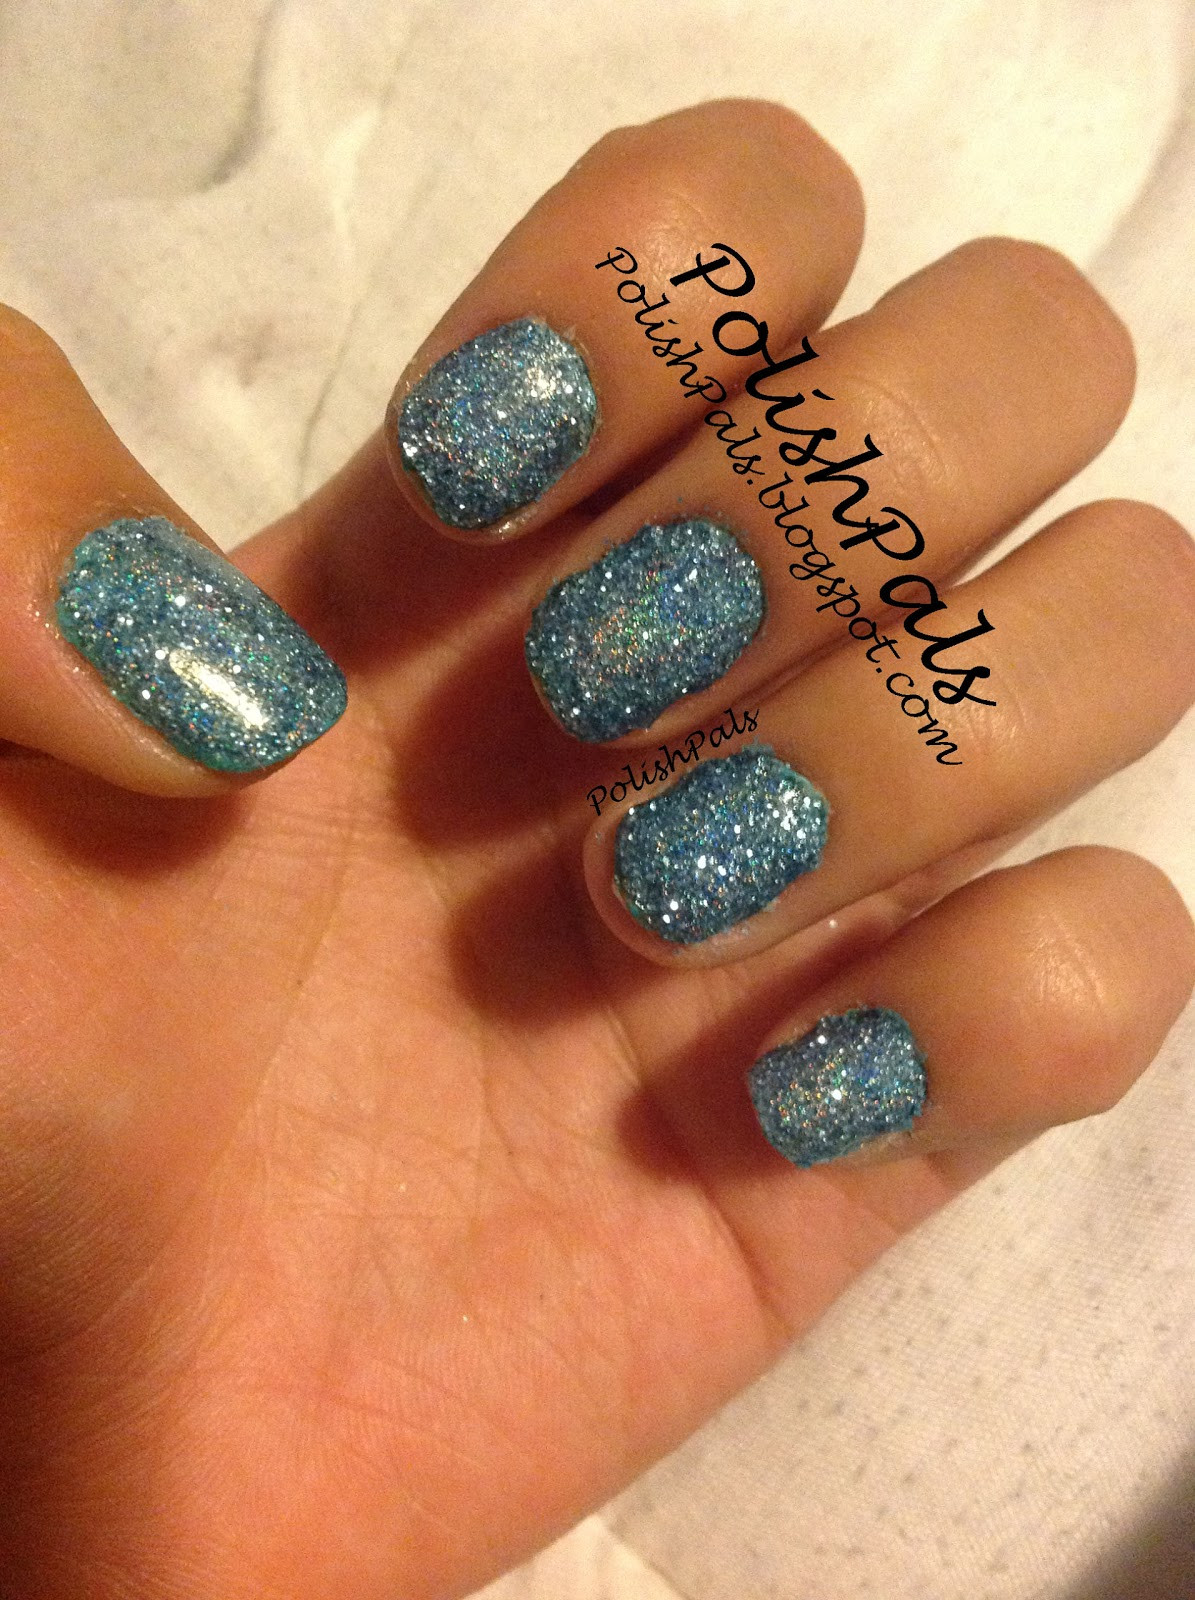 How To Glitter Nails
 Polish Pals Loose Glitter Nails Tutorial